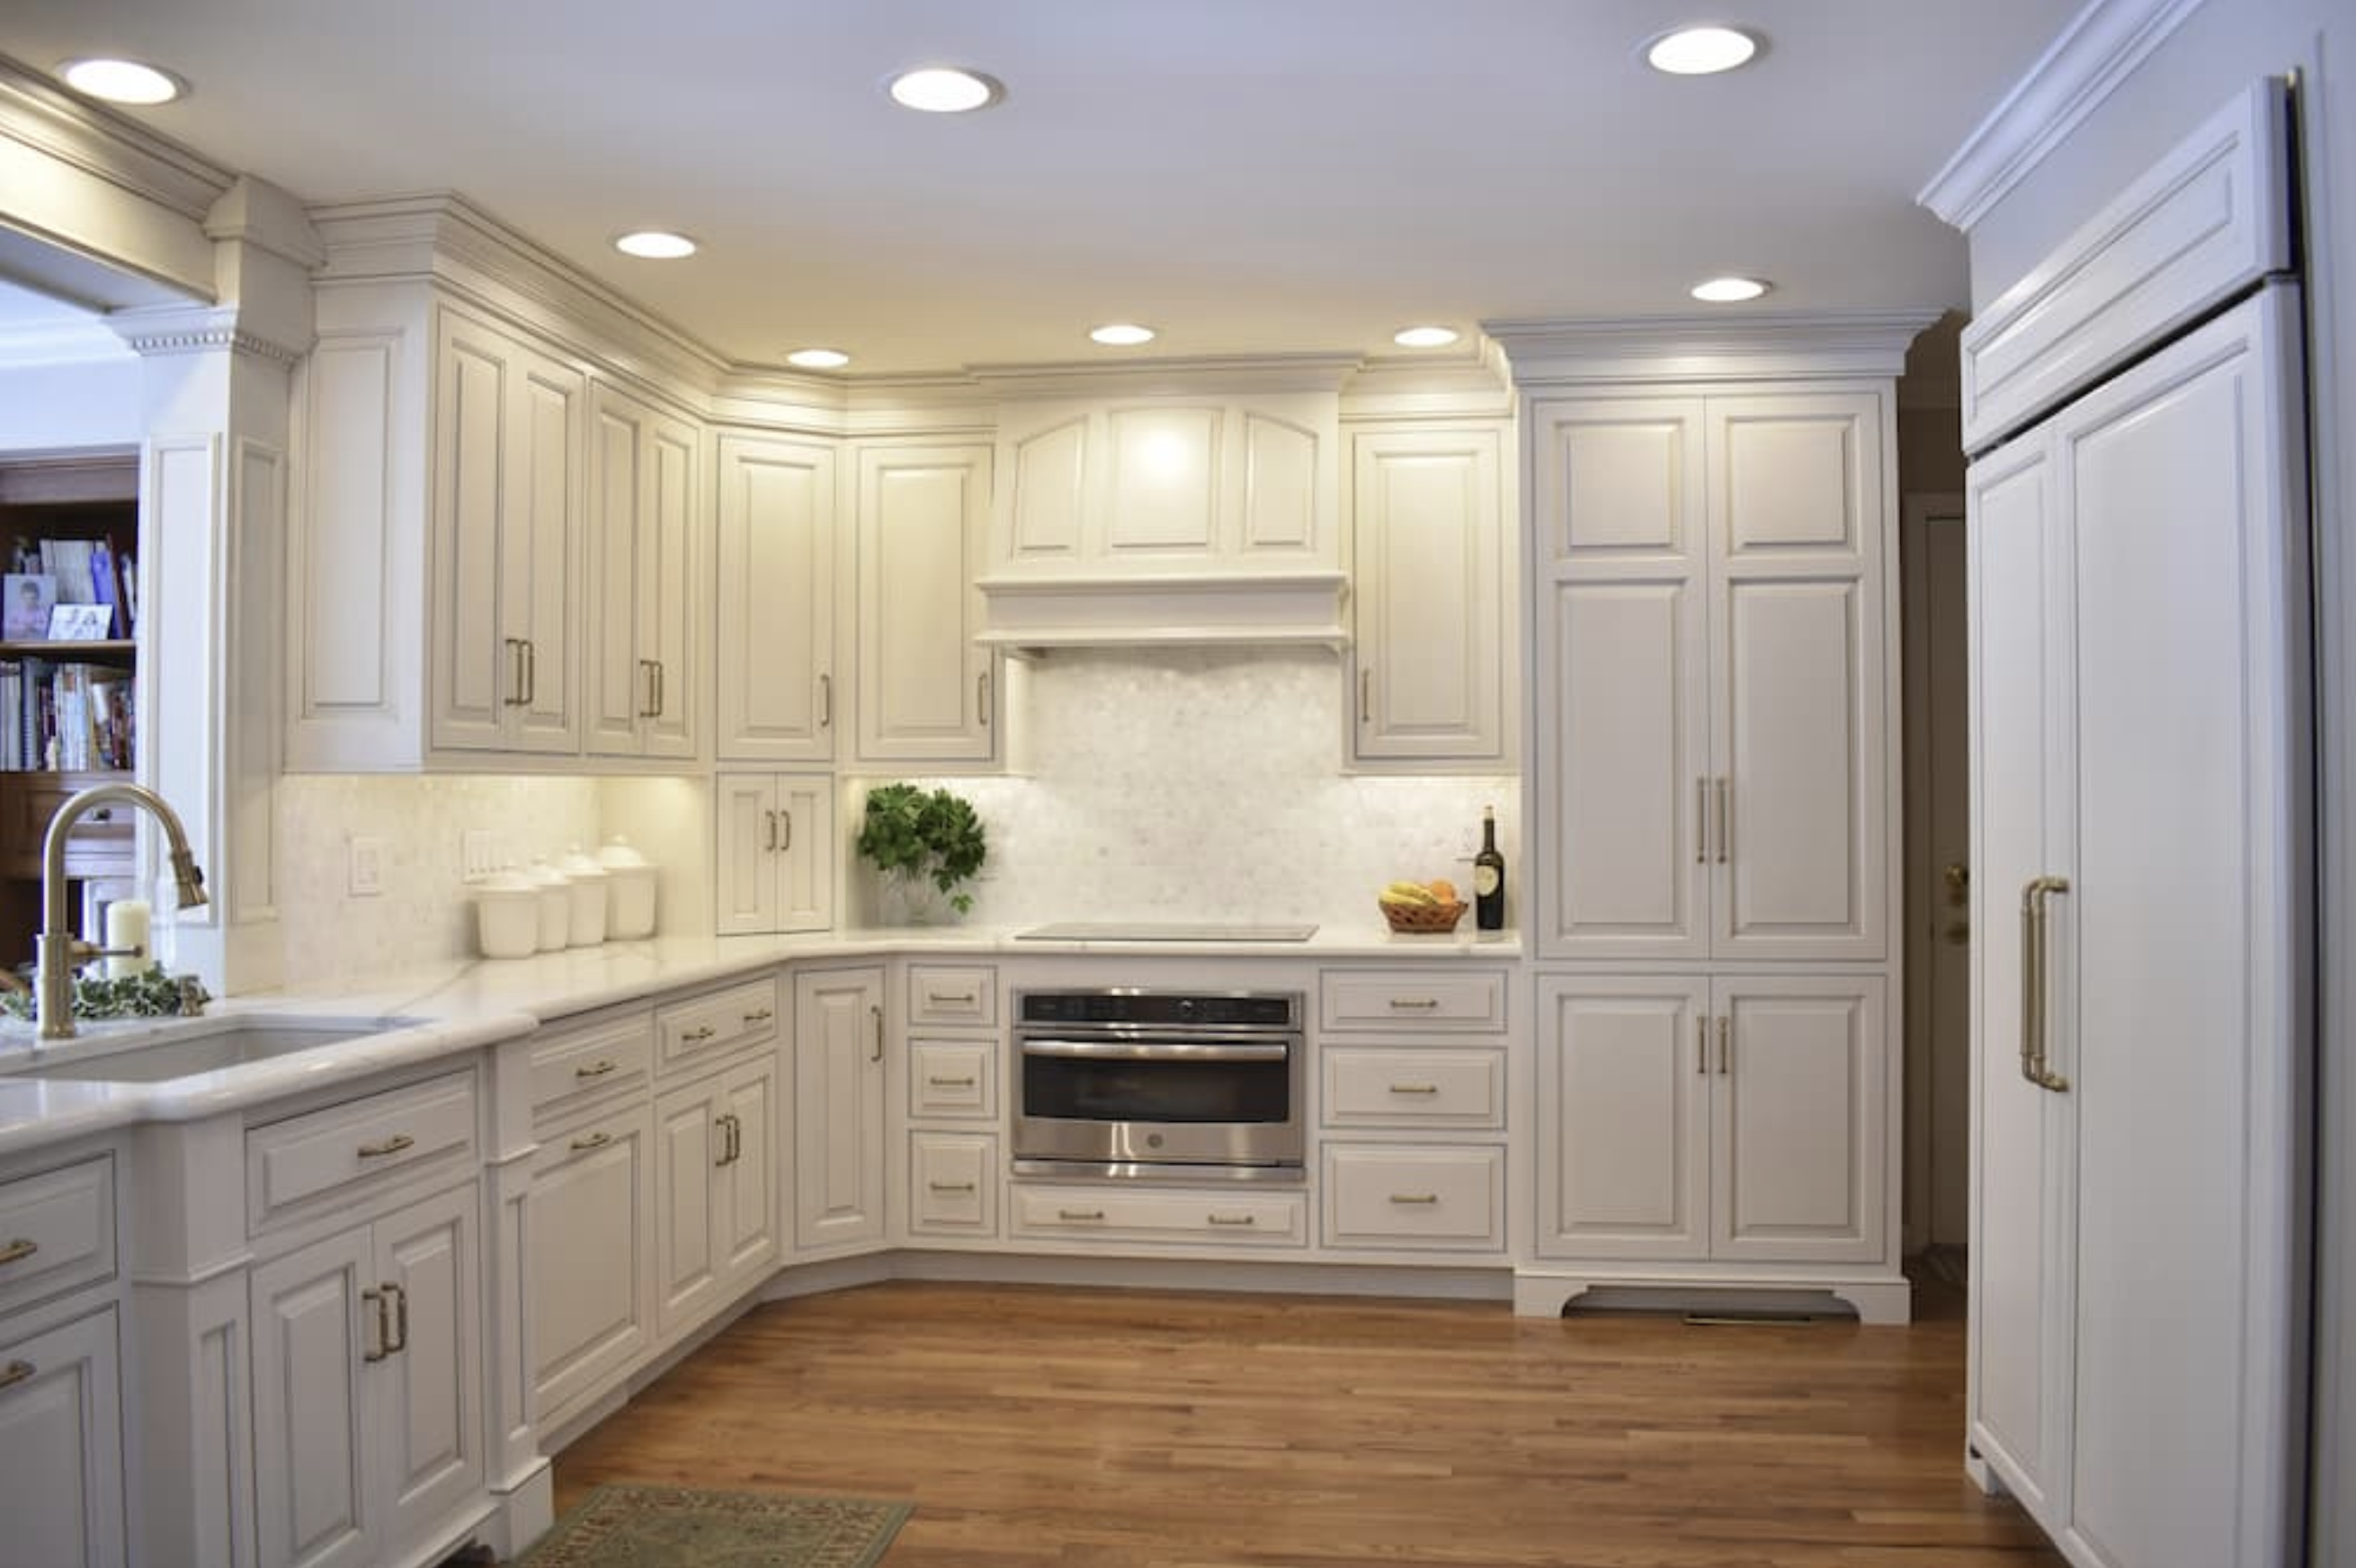 Shop custom kitchen Cabinet online in malaysia at best price